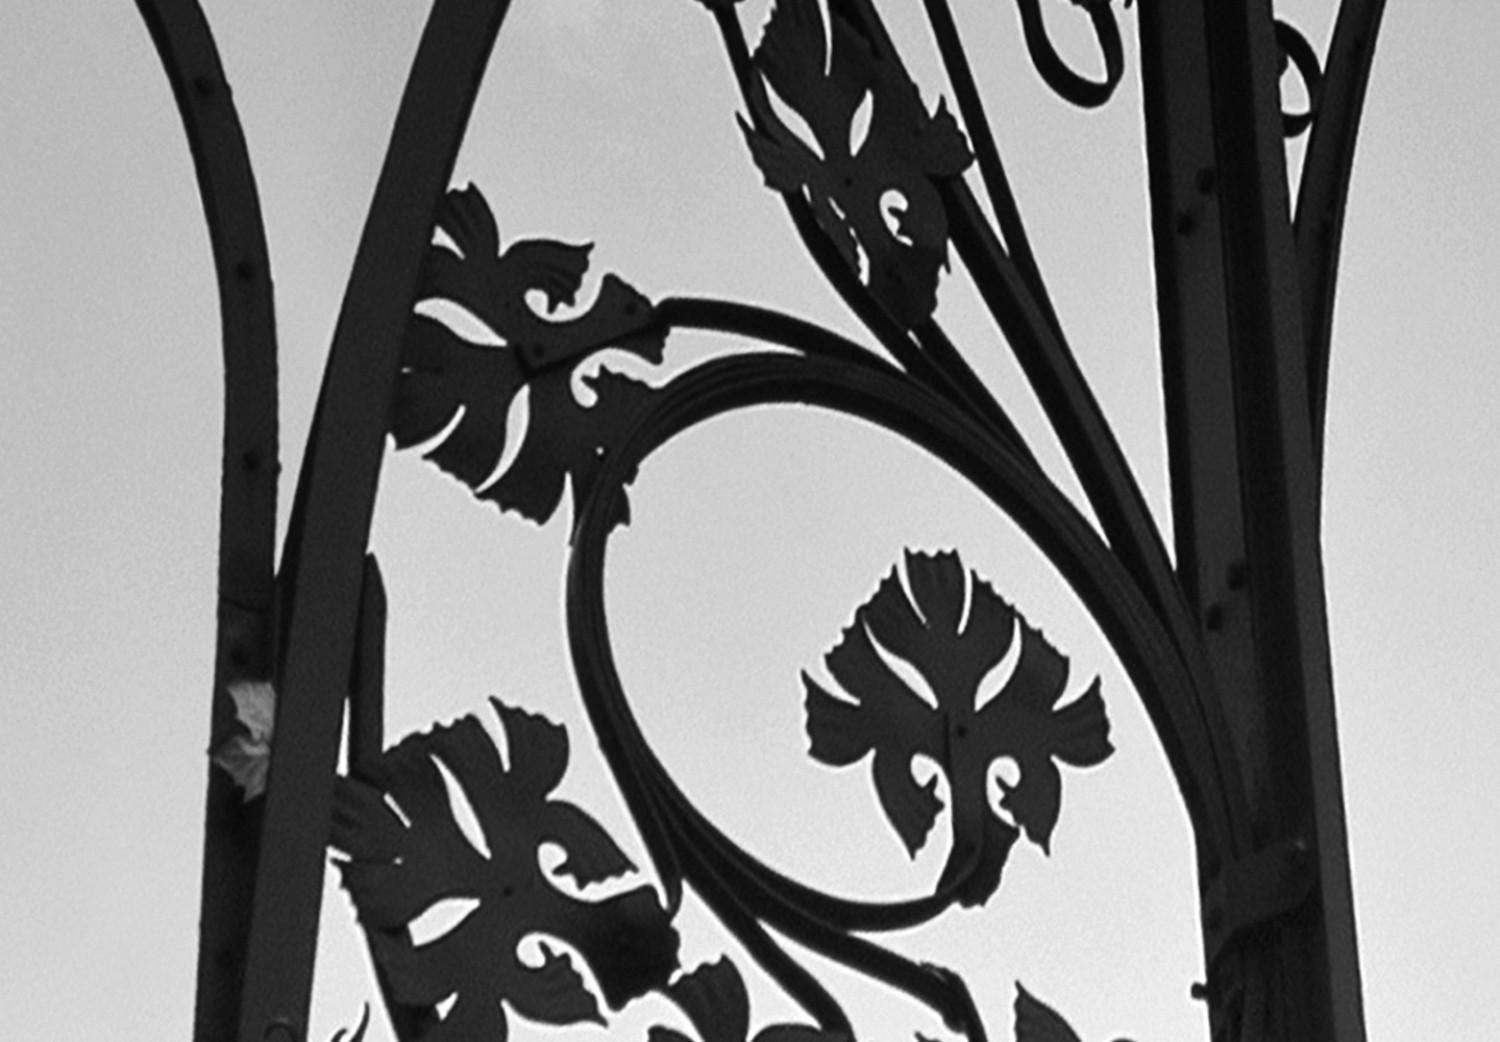 Canvas Street light in Barcelona - black and white photo with architecture